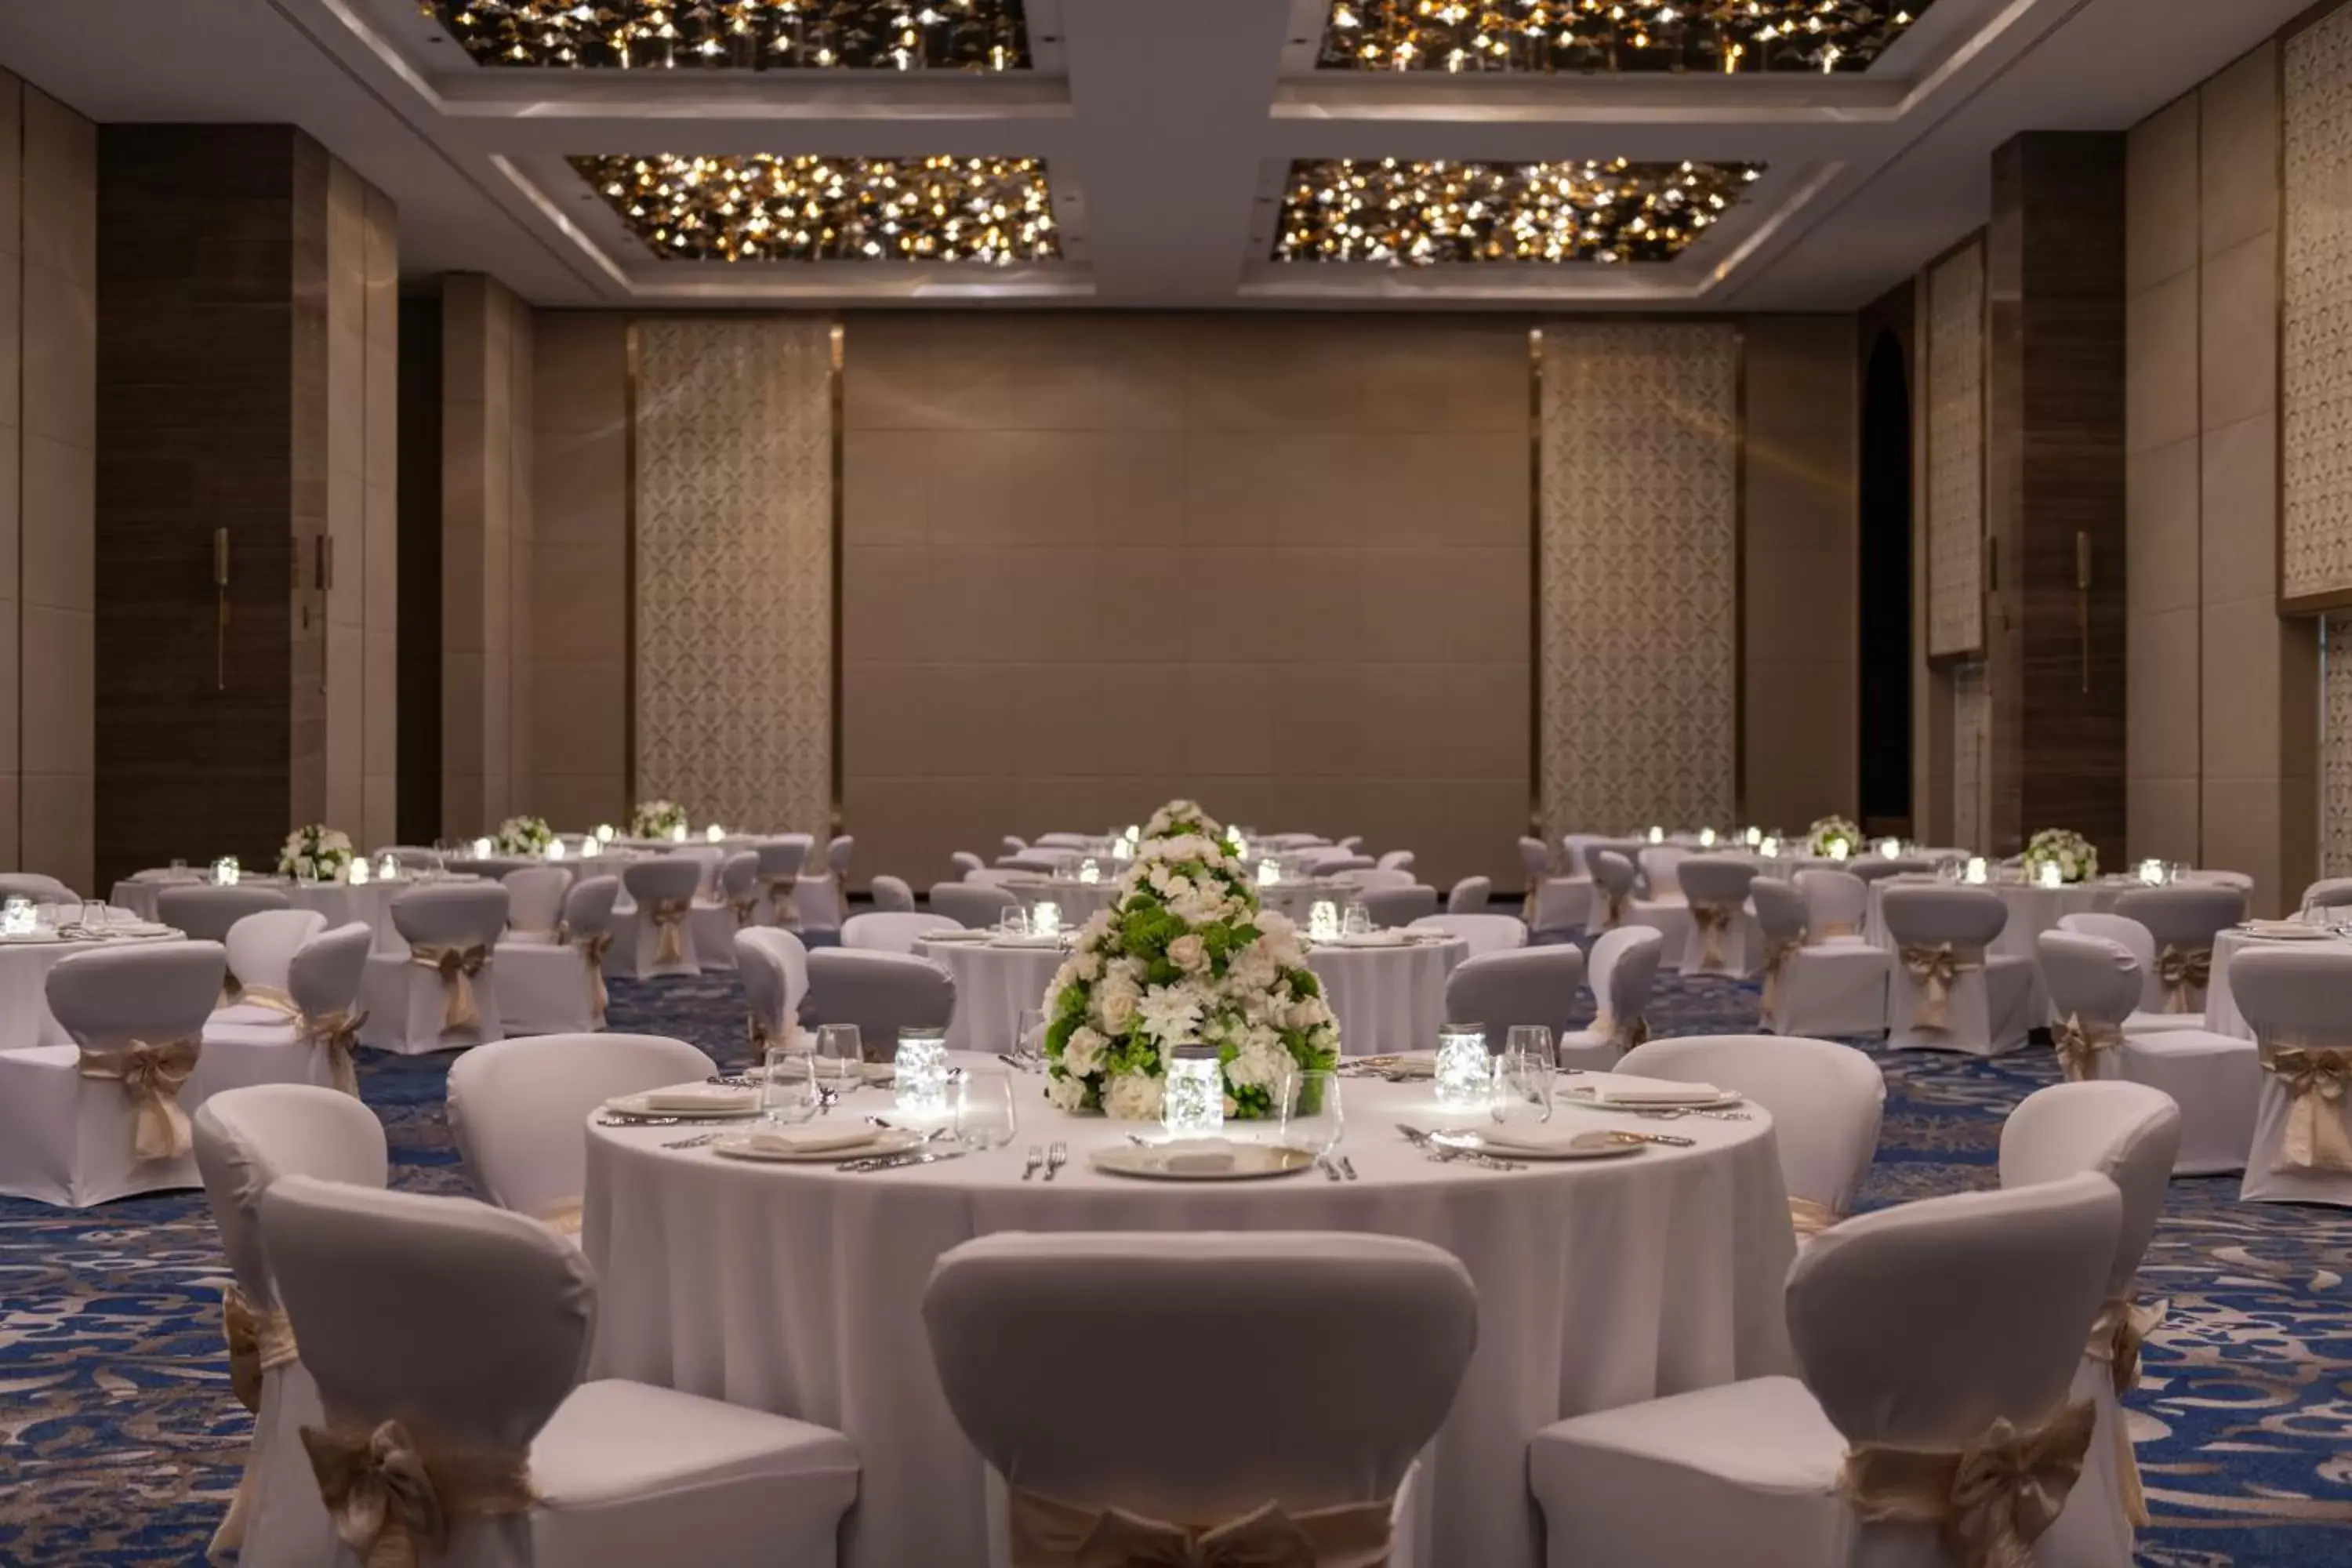 Banquet/Function facilities, Banquet Facilities in Abesq Doha Hotel and Residences